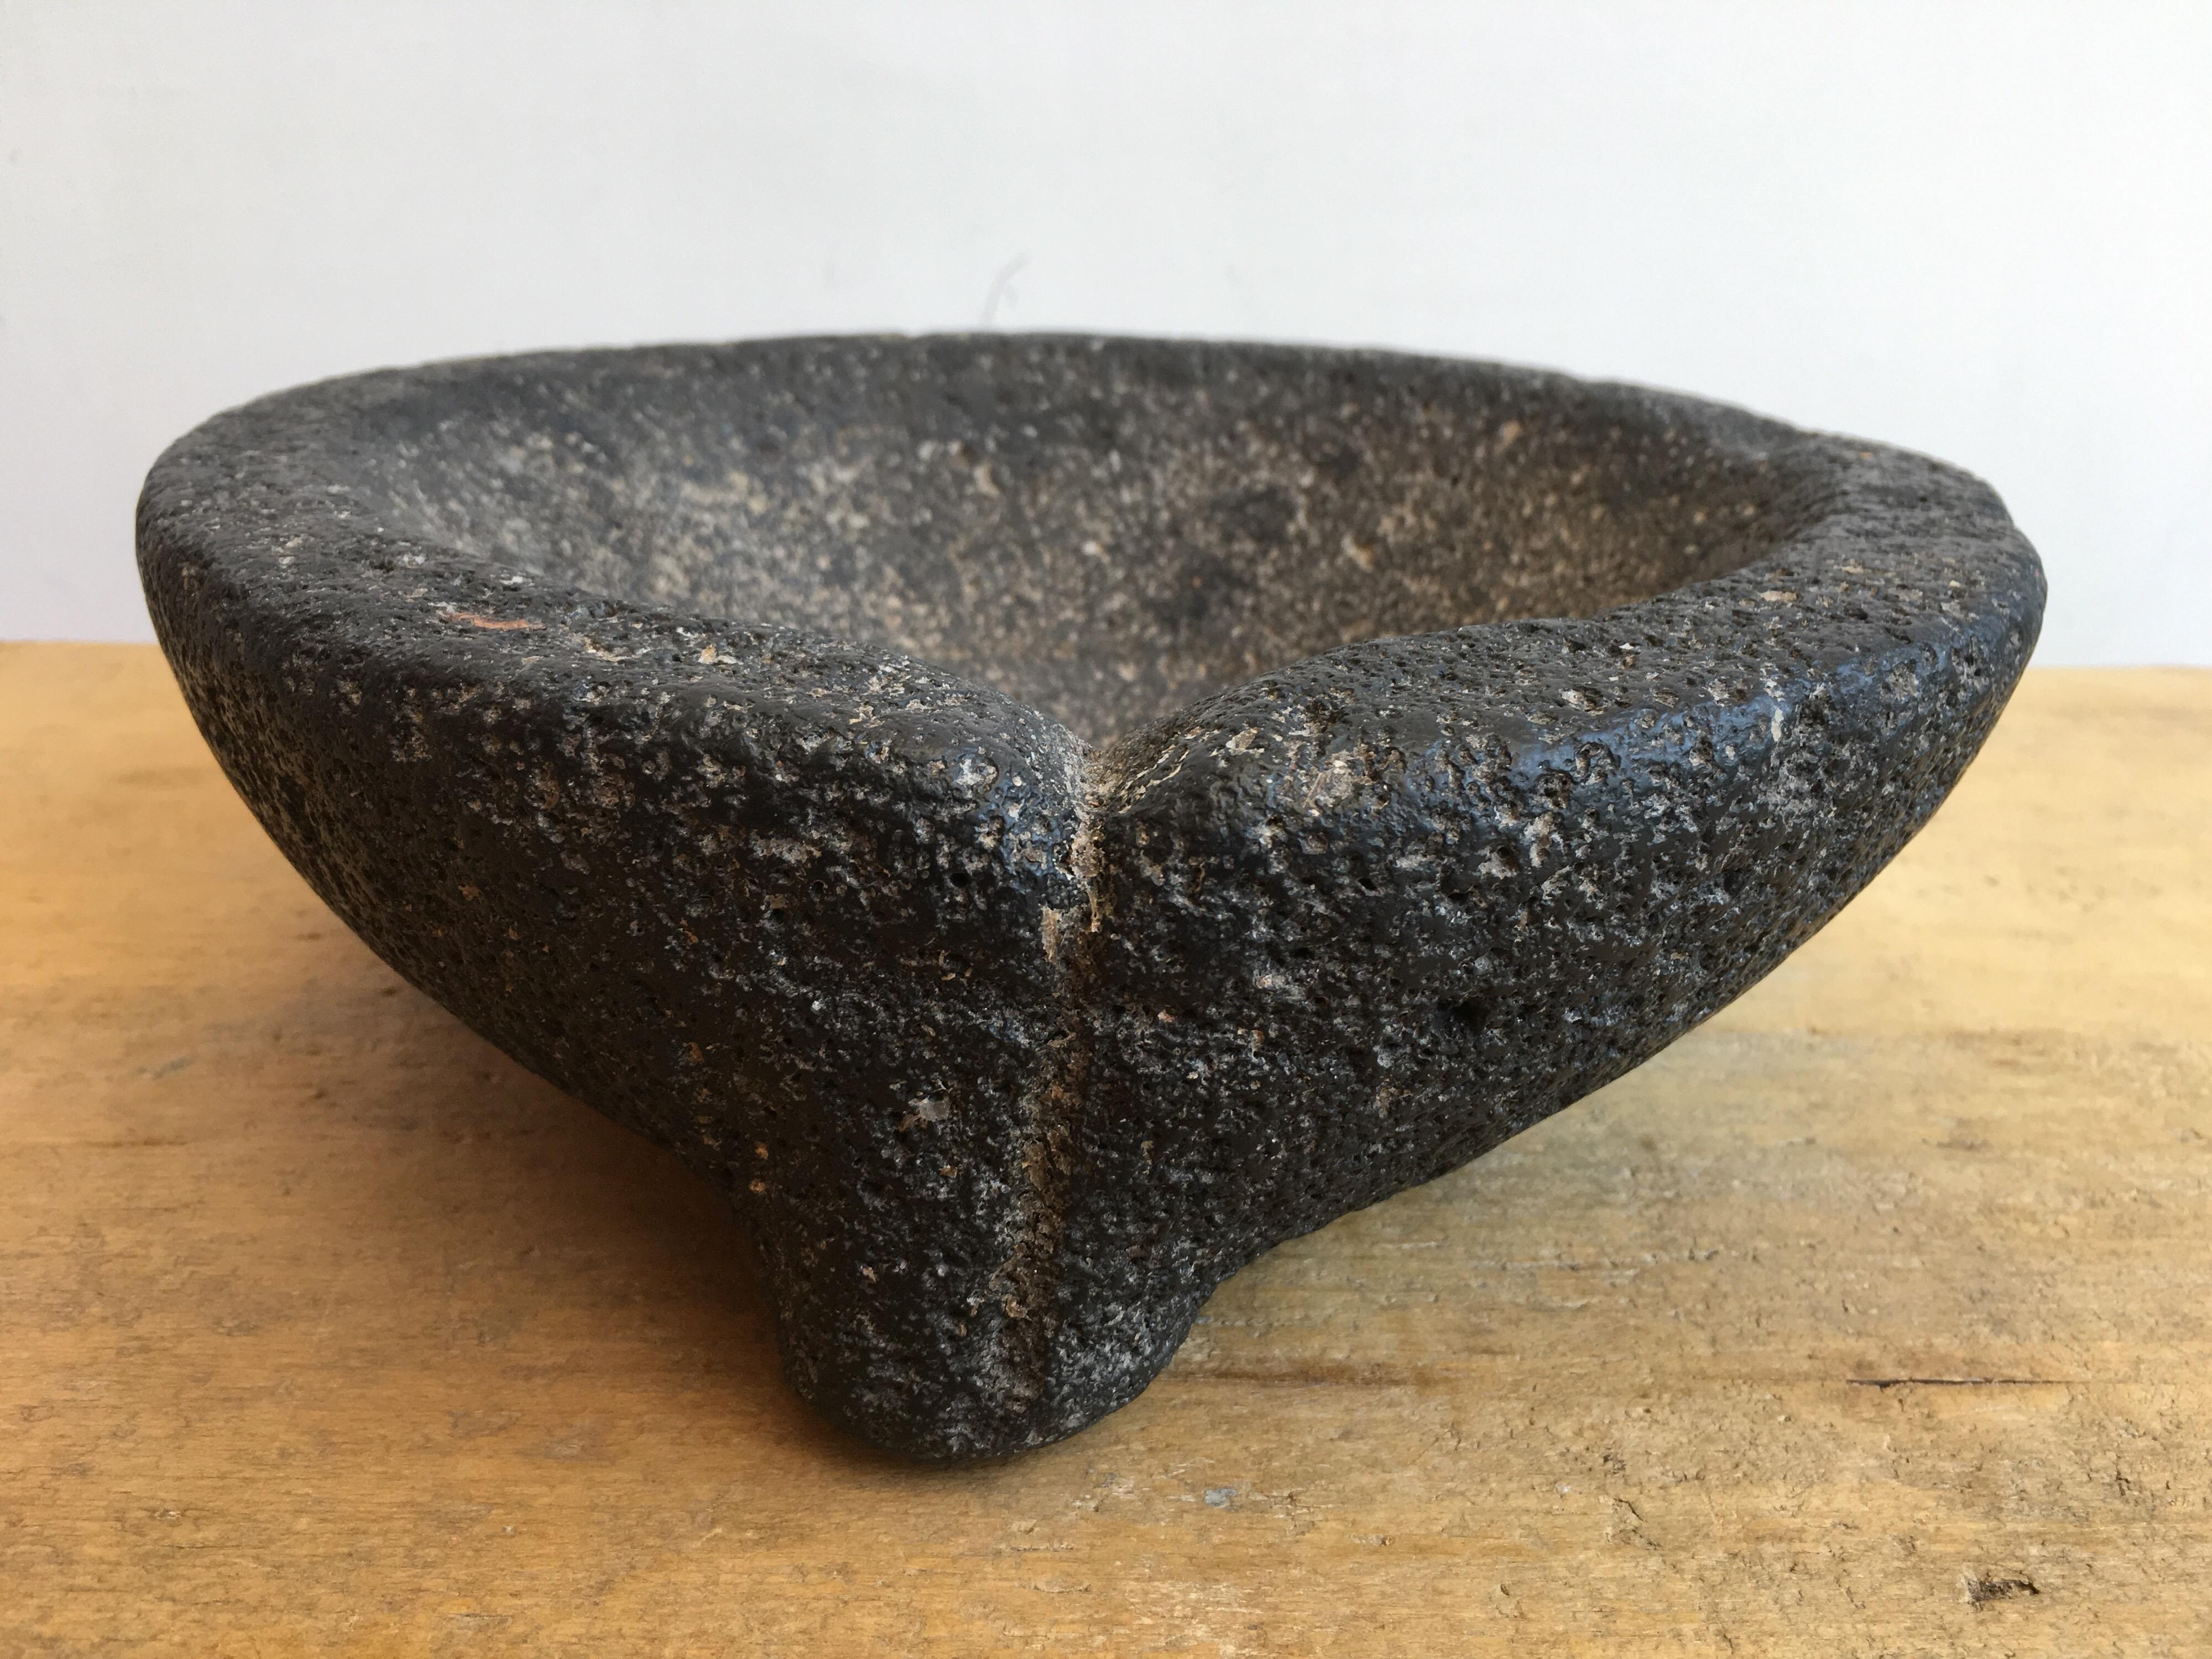 Volcanic stone mortar and pestle from the Puebla highlands, circa 1970s.